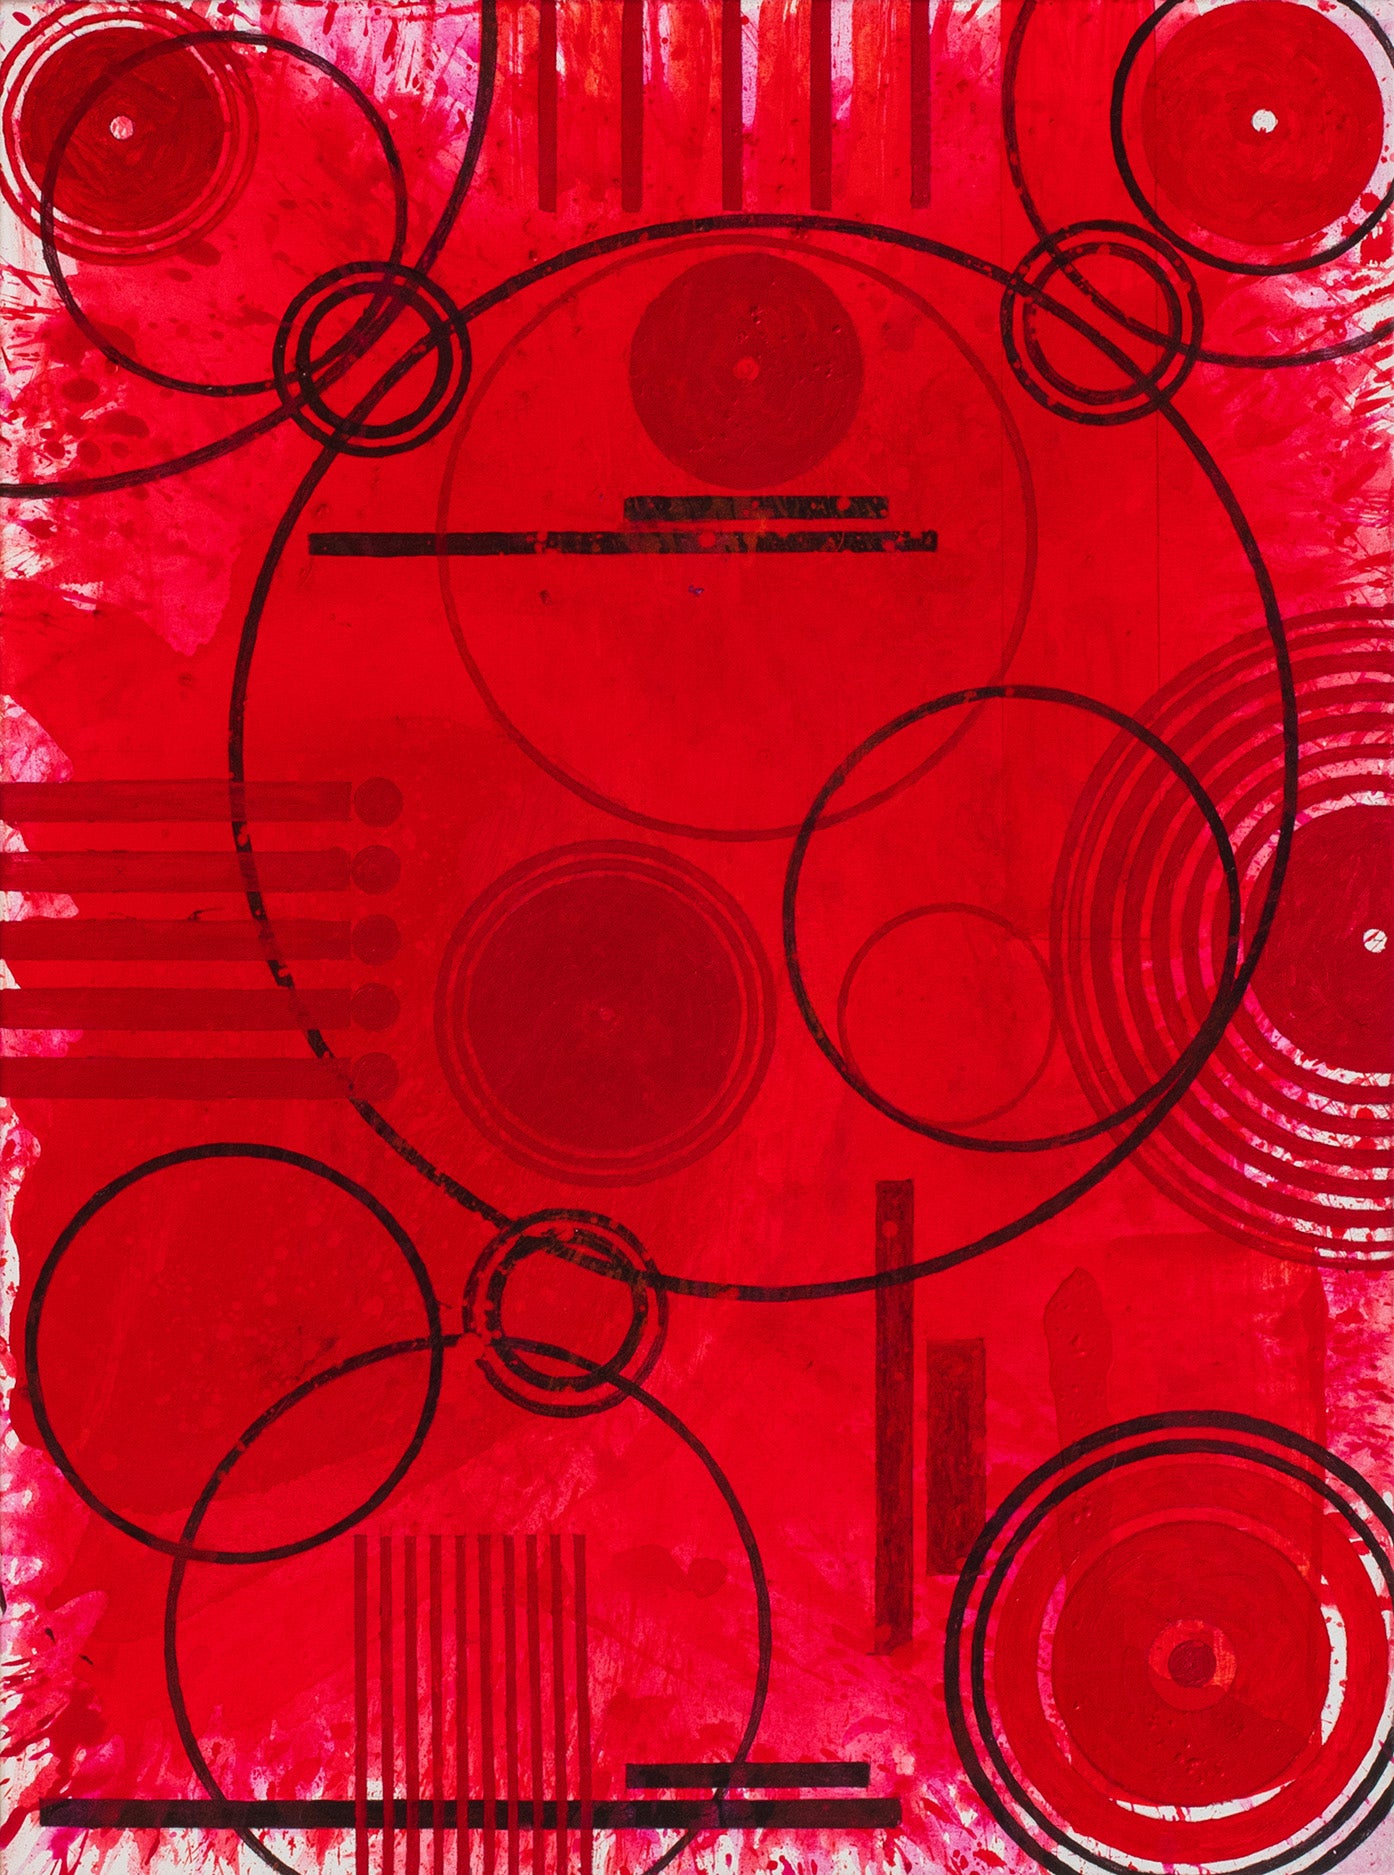 J. Steven Manolis, REDWORLD (CONCENTRIC) 48.36.01, 2019, acrylic on canvas, 48 x 36 inches, Red Abstract wall art, Abstract expressionism art for sale